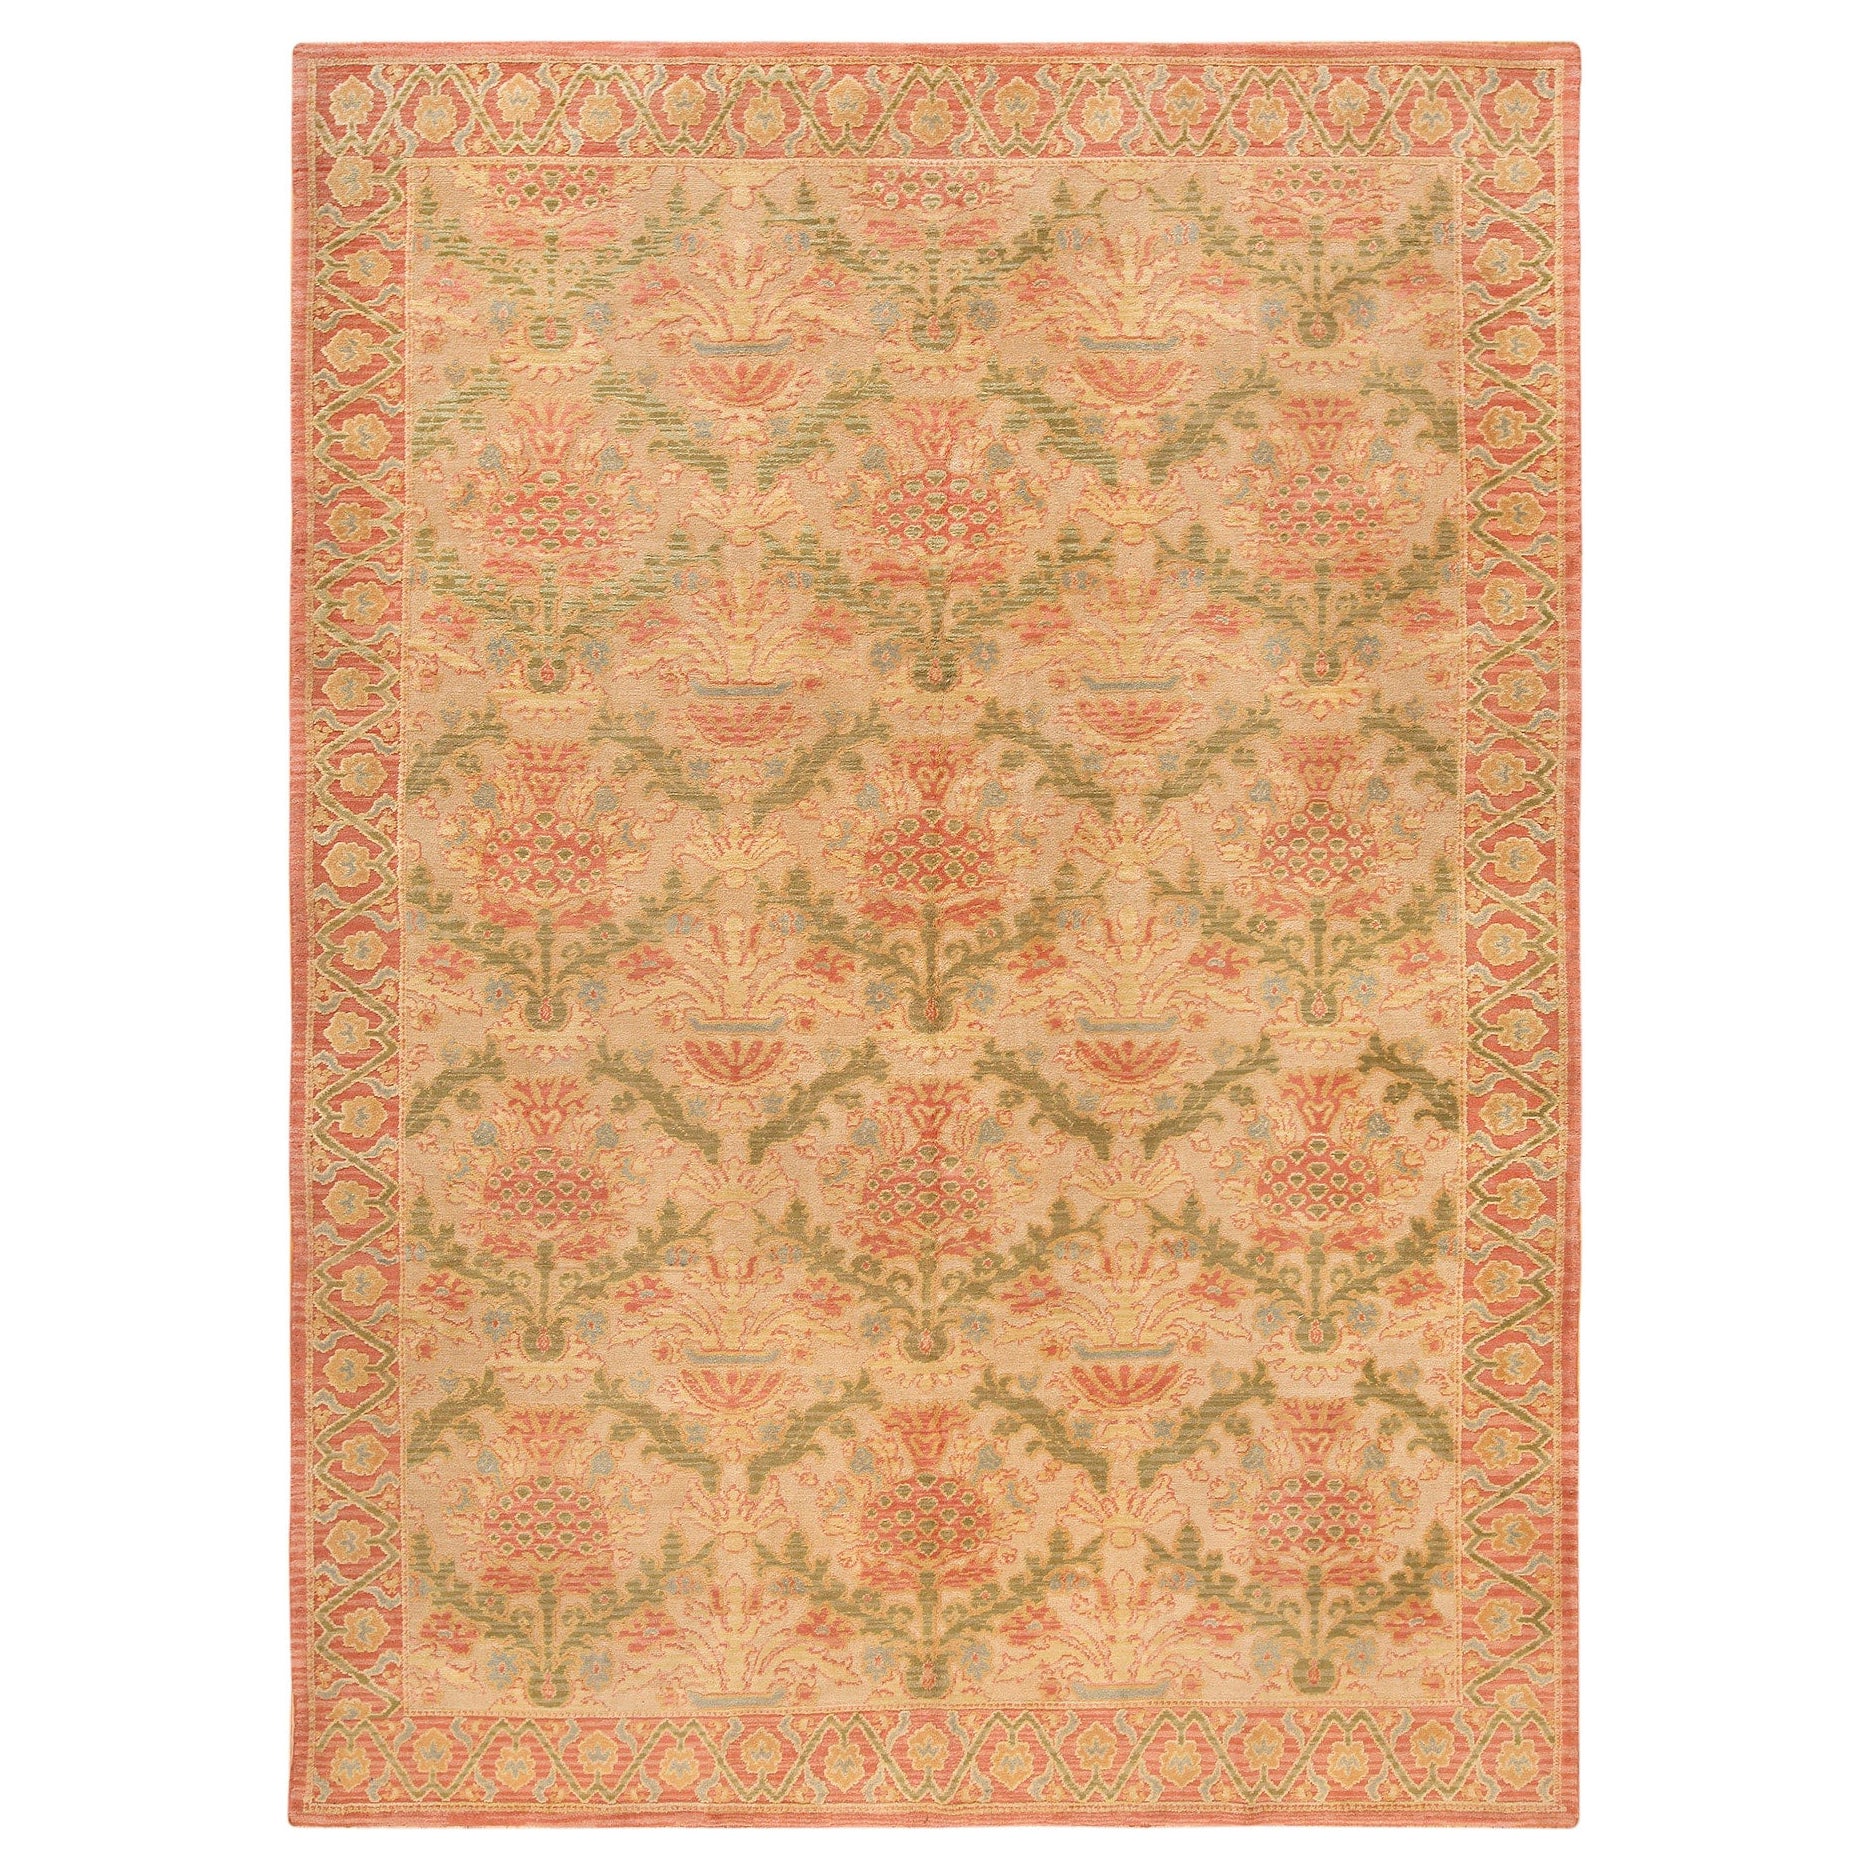 Nazmiyal Collection Vintage Spanish Rug. 8 ft 2 in x 11 ft 6 in